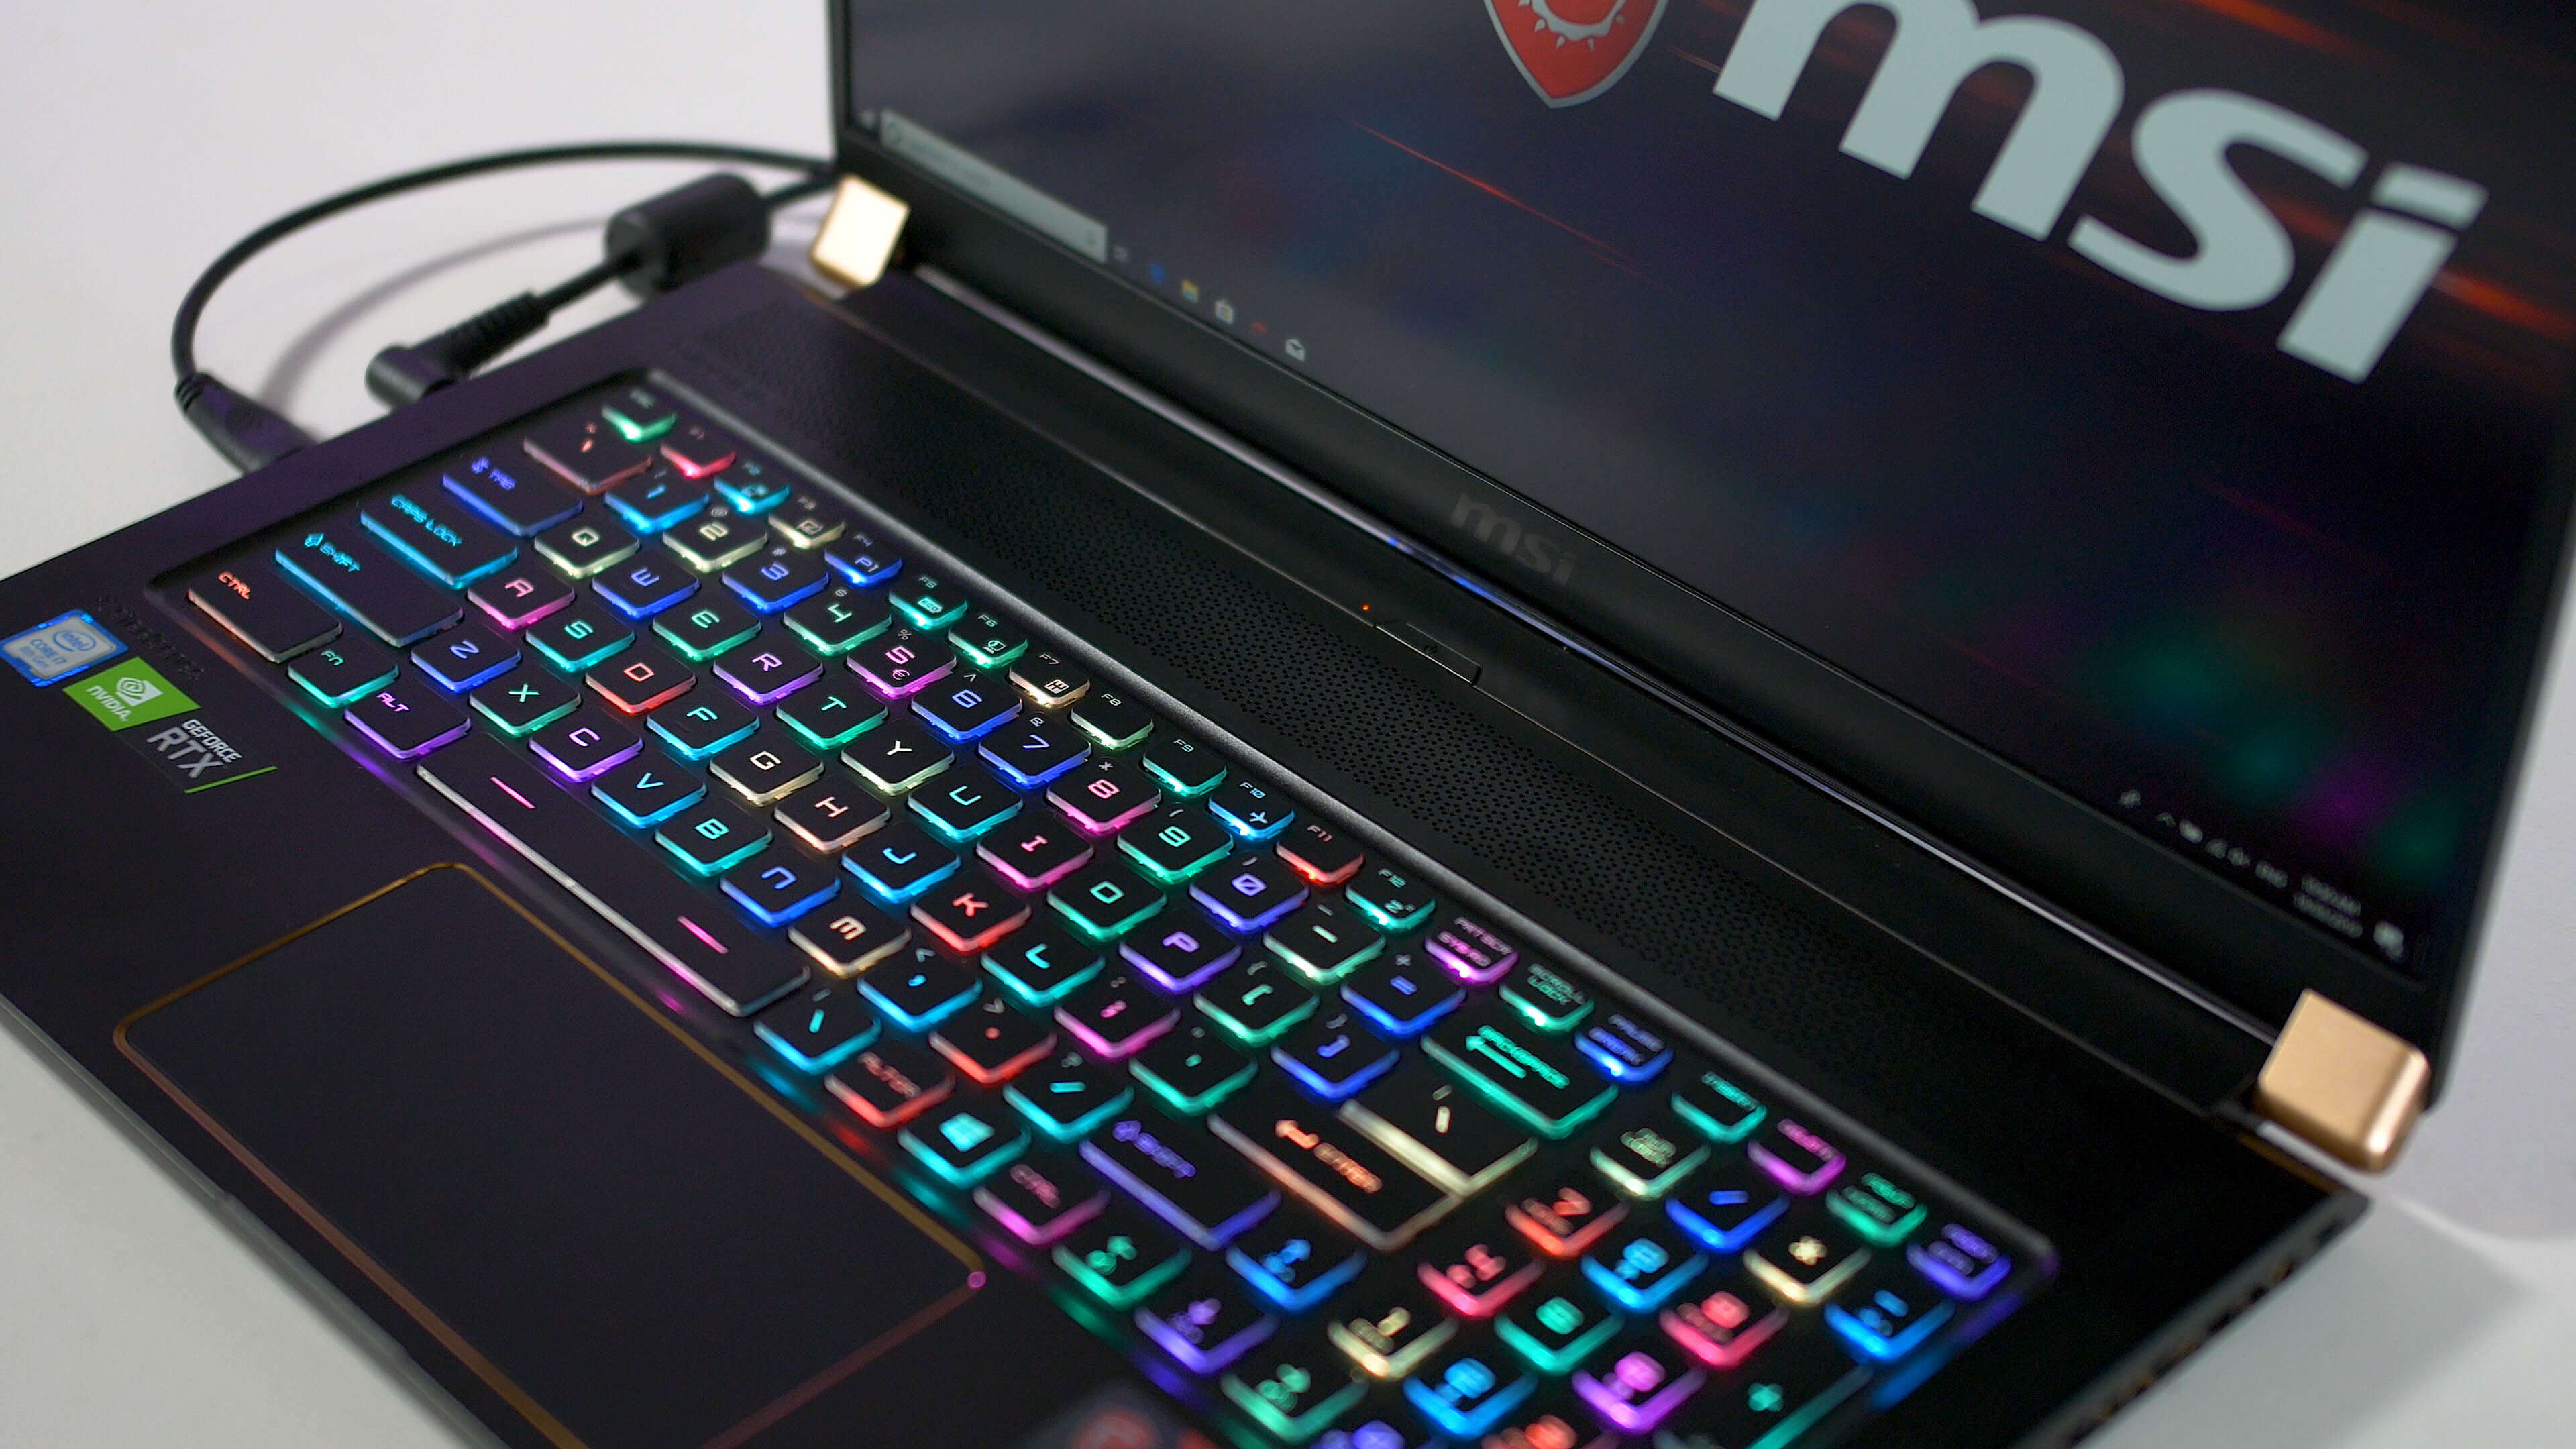 MSI GS75 Stealth Laptop Review TechSpot